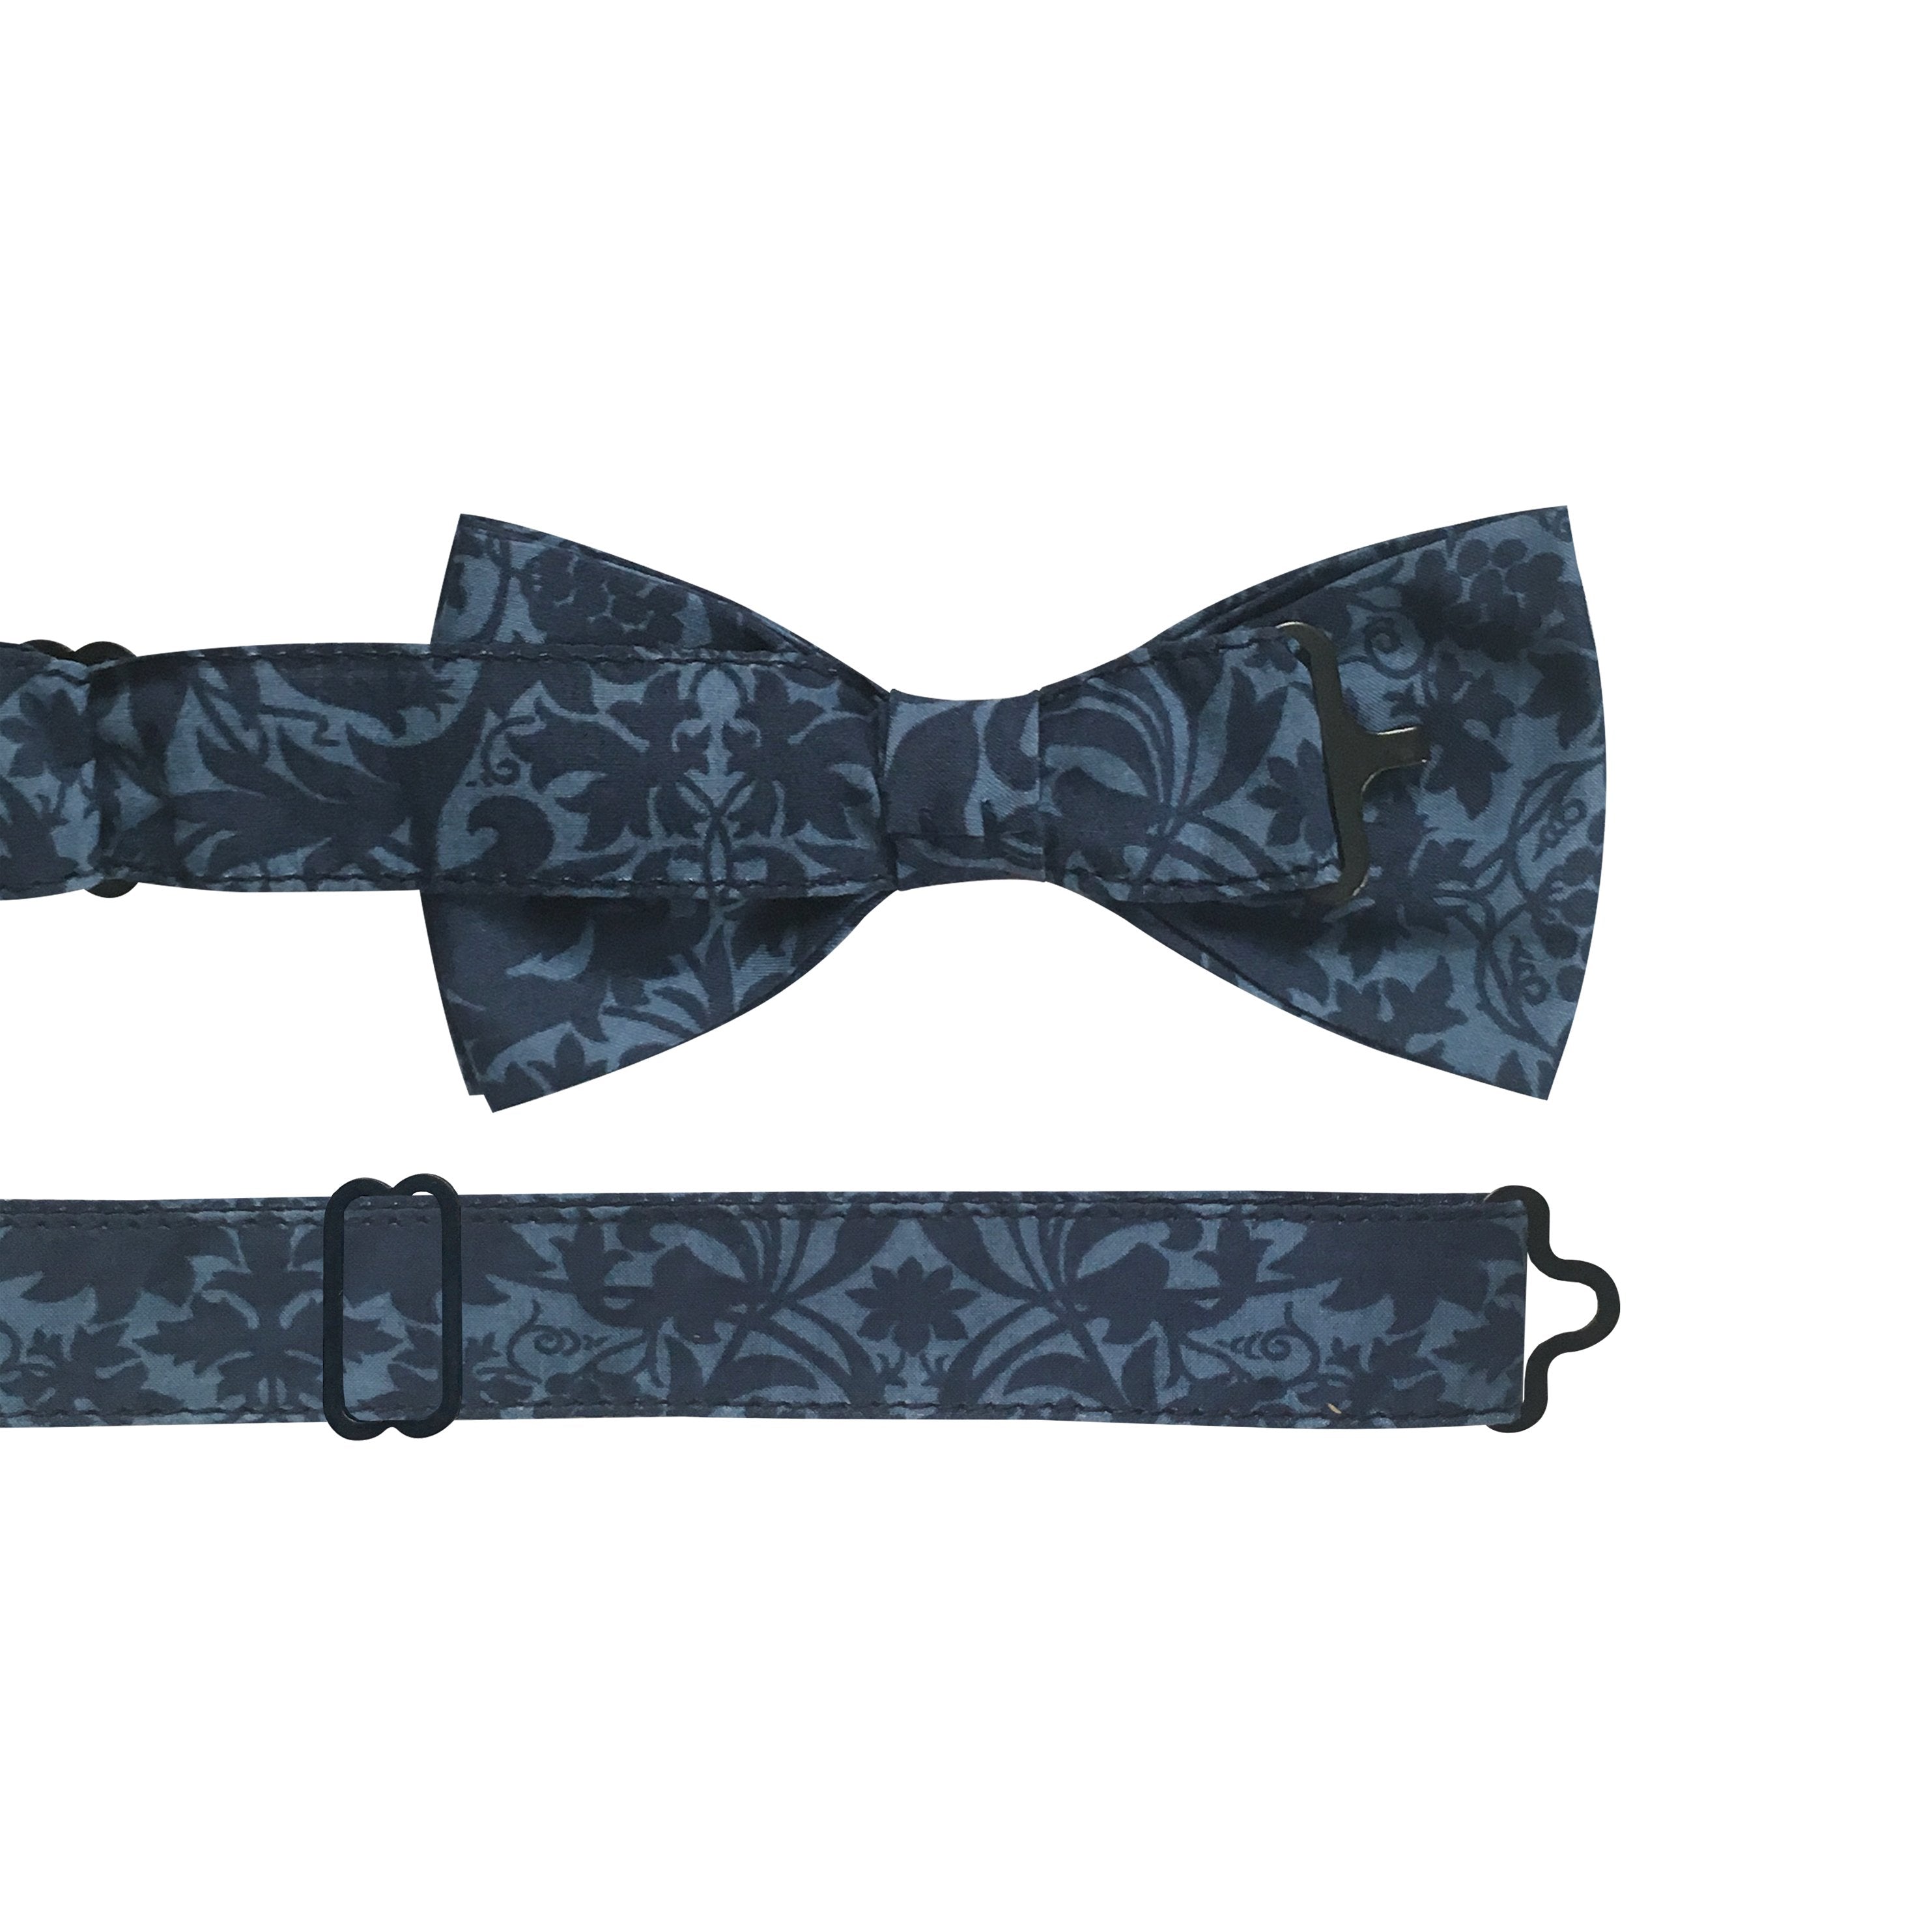 LIBERTY BOW TIE – MORTIMER SILHOUETTE A